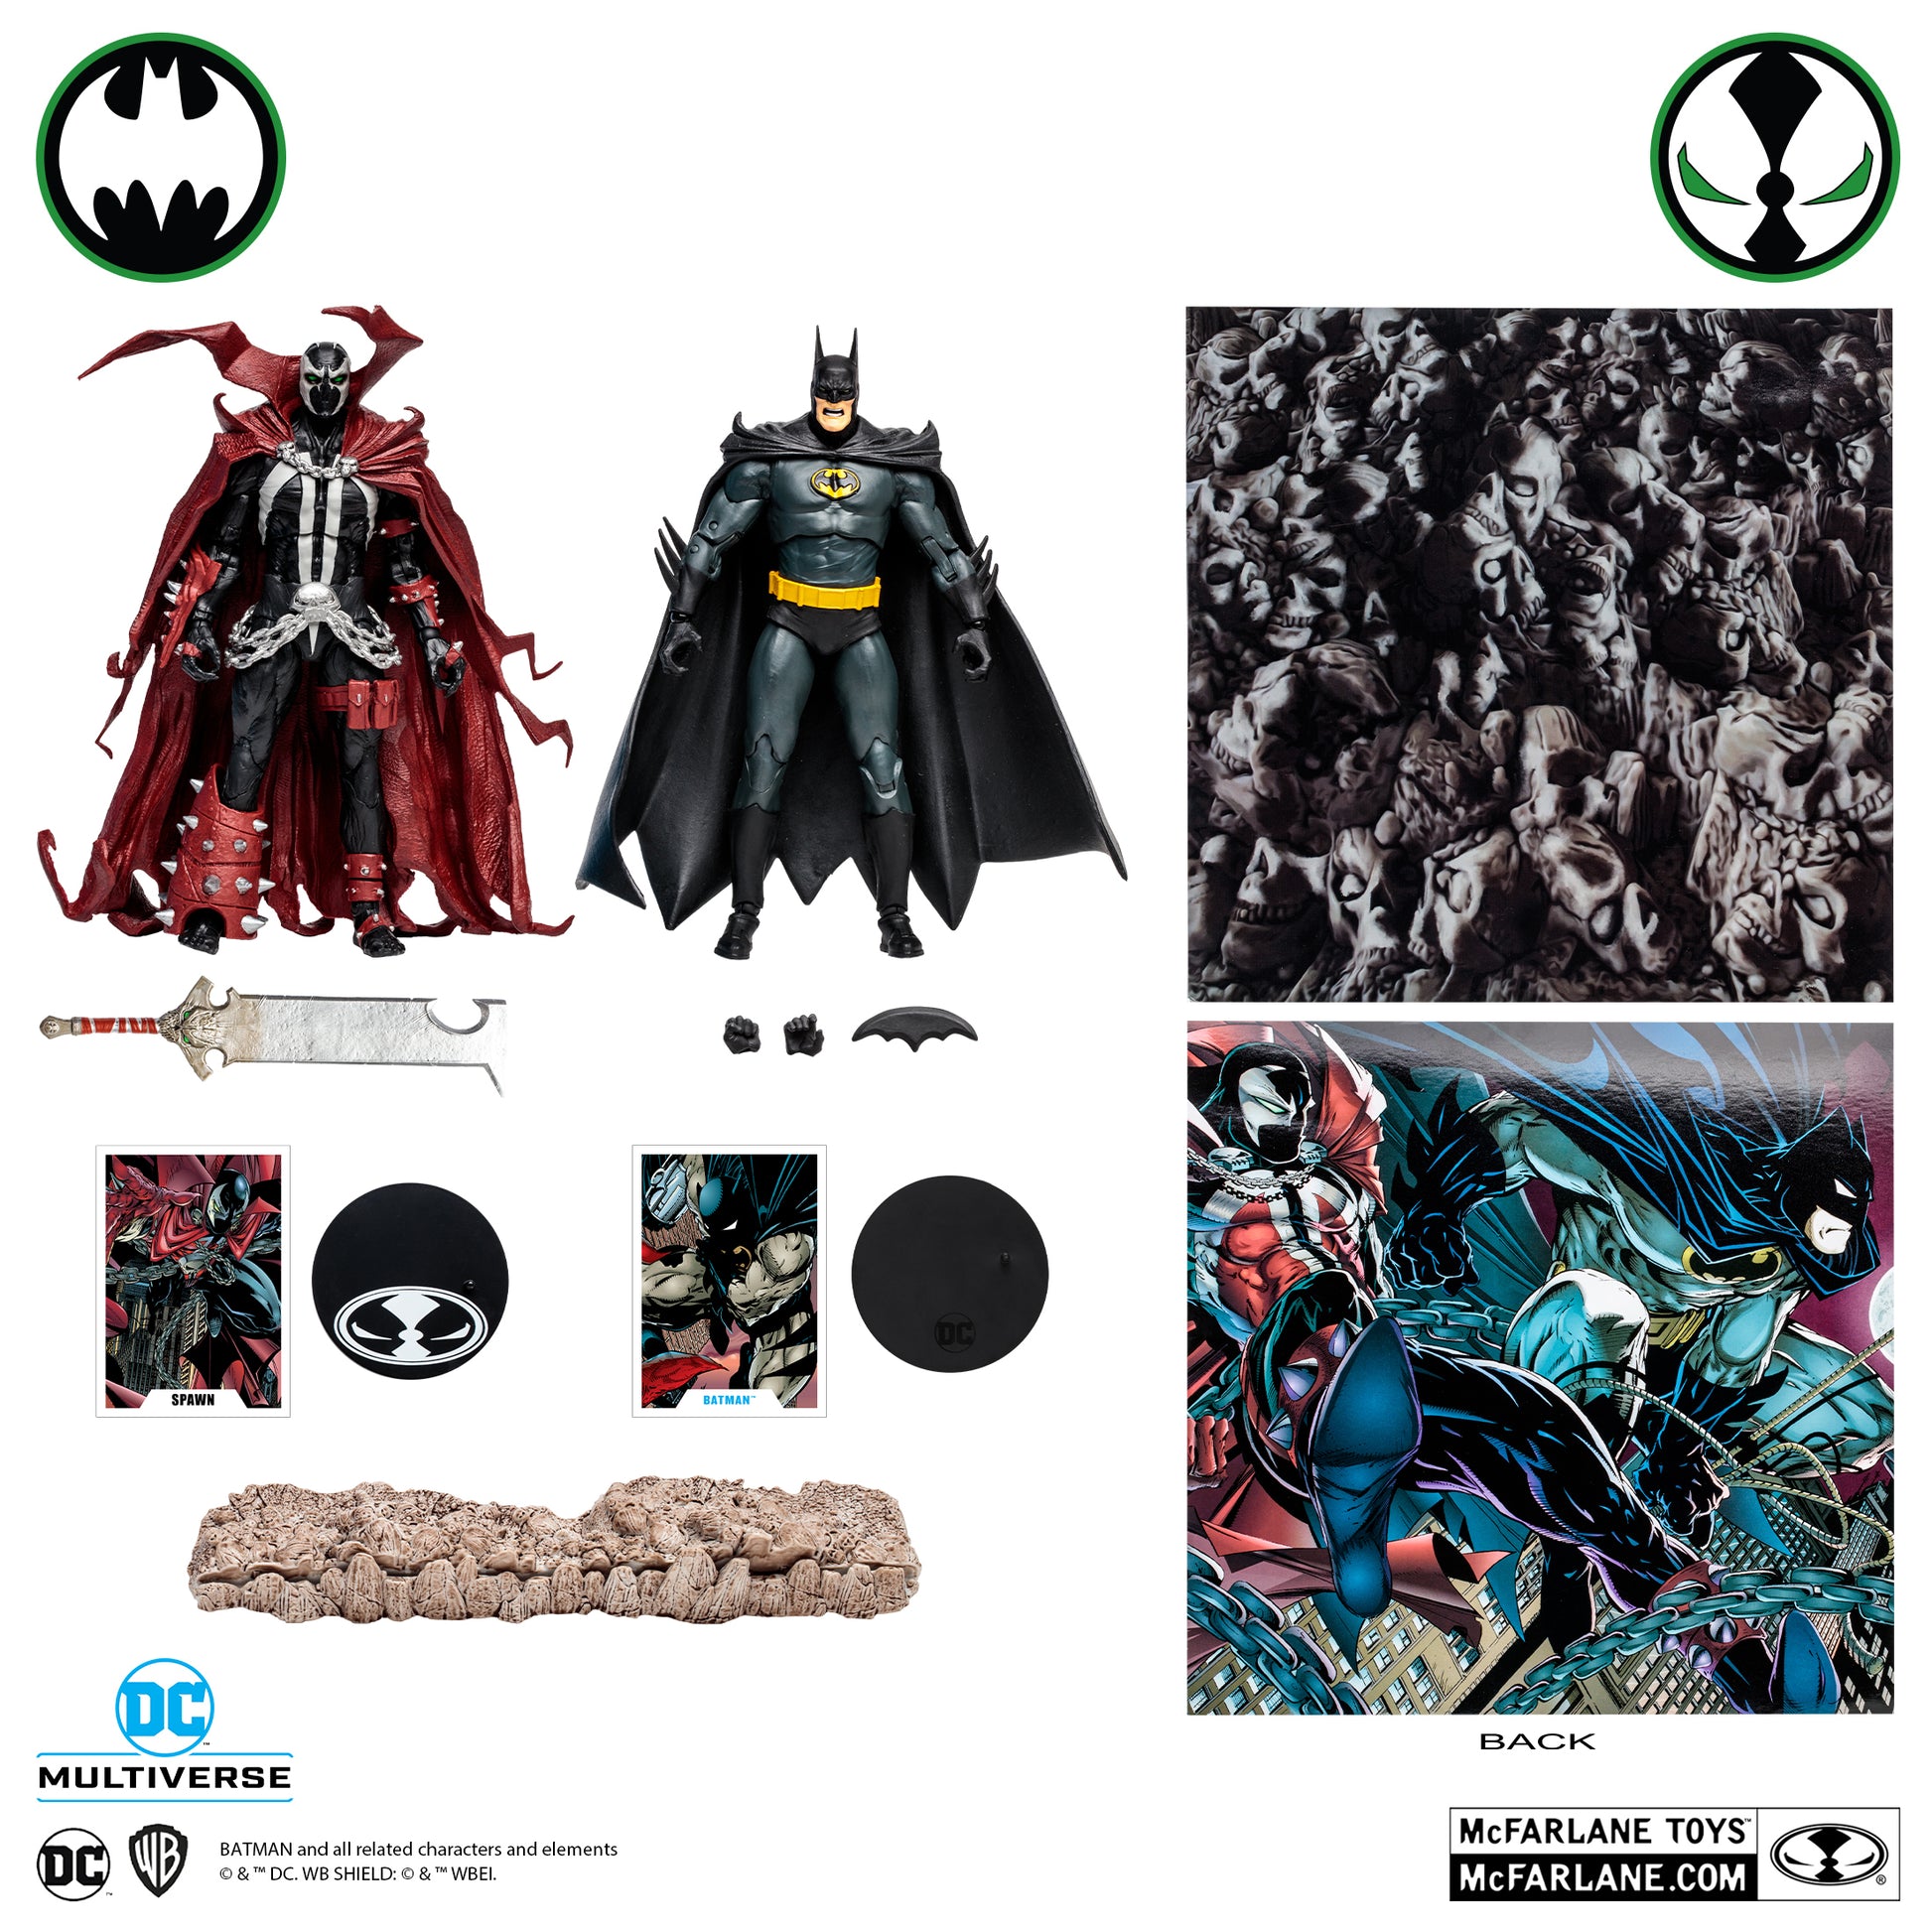 Batman and Spawn Based on Comics by Todd McFarlane 7-Inch Action Figure 2-Pack - Heretoserveyou